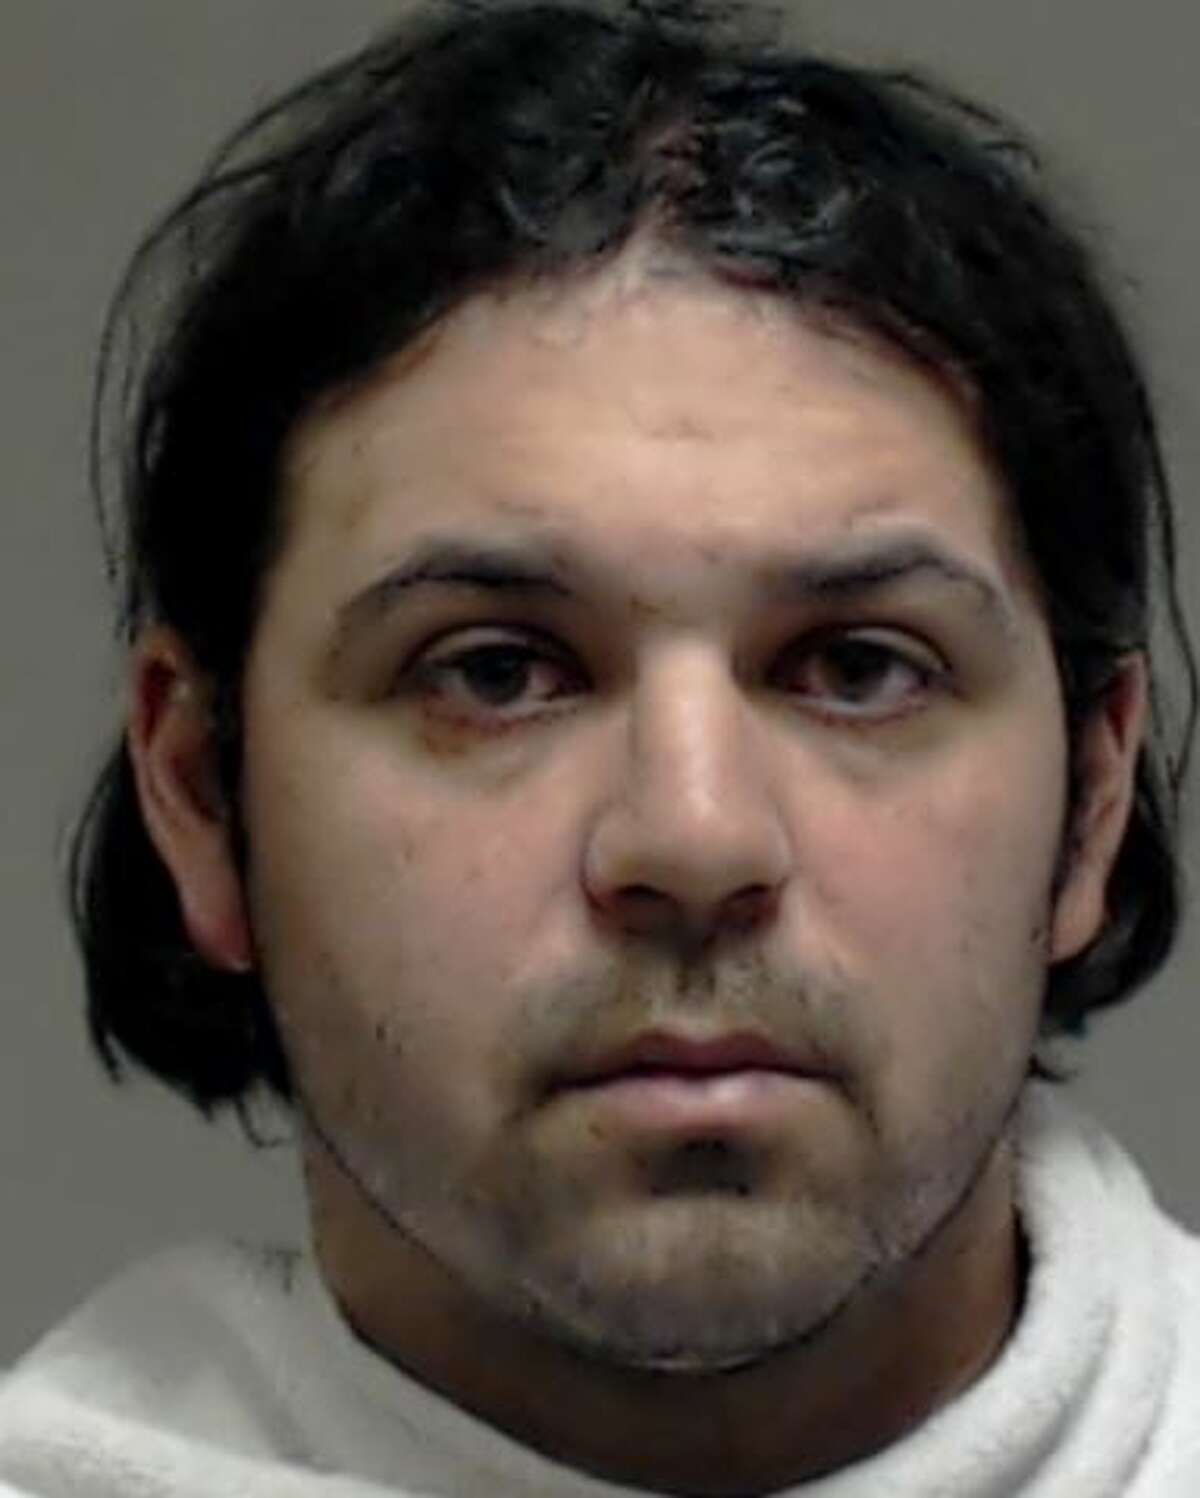 Collin County Sheriff's deputies arrested Aaron Russell Reza on Tuesday on felony charges of improper relationship between an educator and student and sexual assault of a child, Collin County Jail records show.